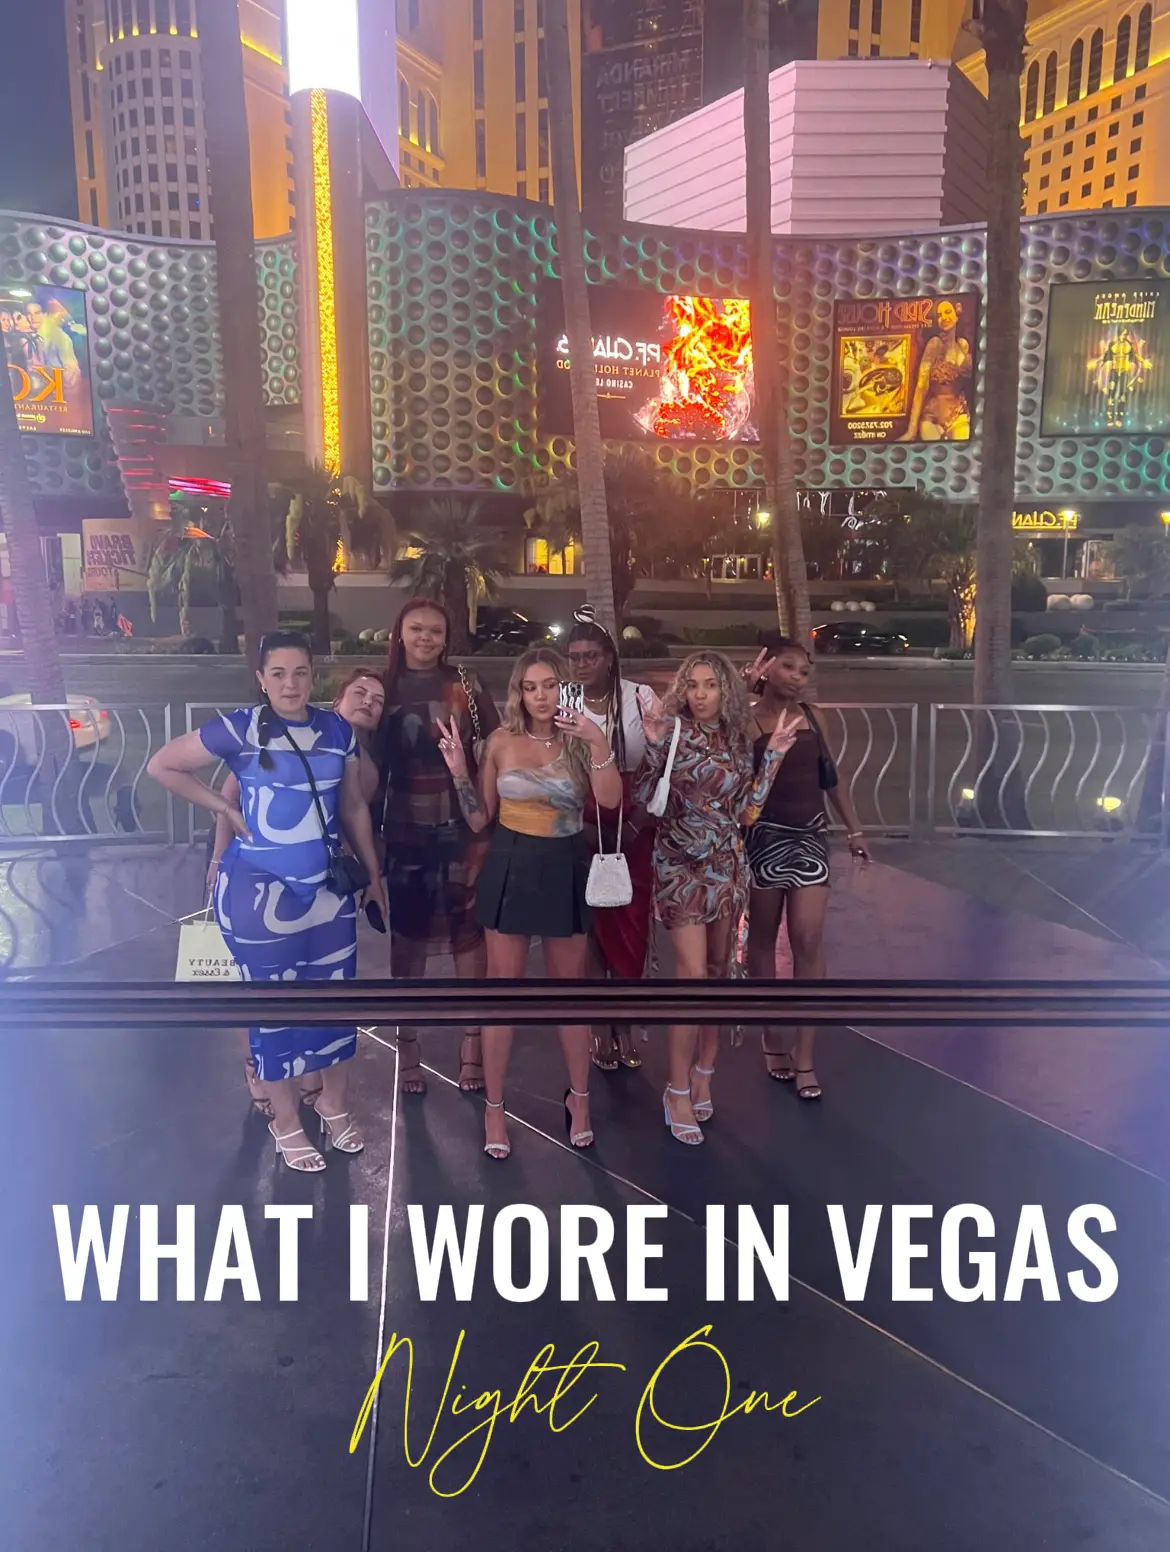 Night out in Vegas: what I wore and where I ate